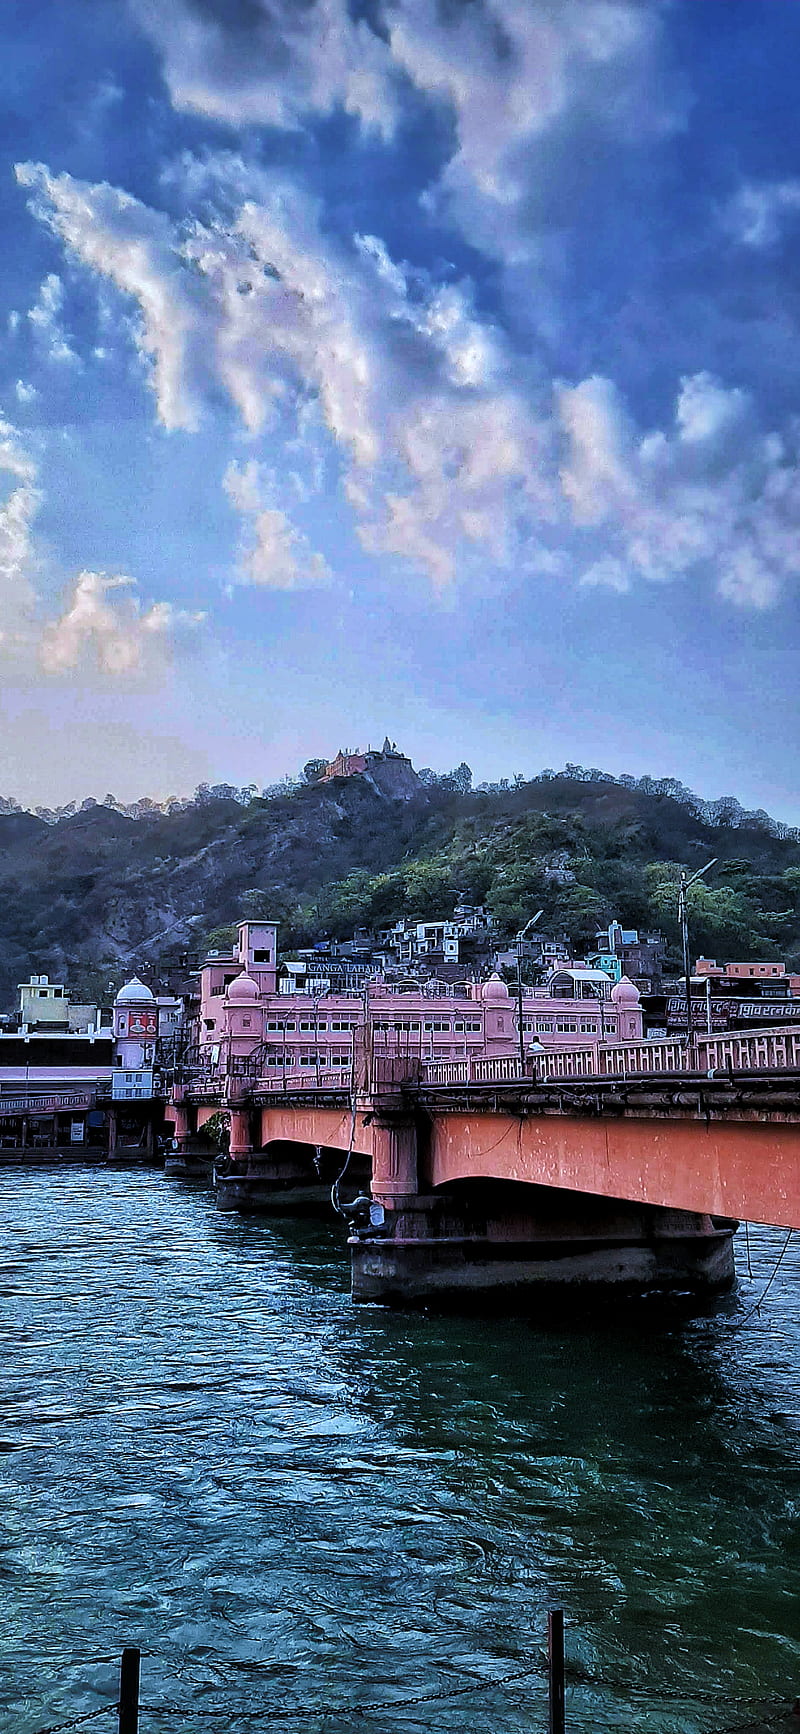 Famous Temples in Haridwar - 15 Most Visited Temples in Haridwar